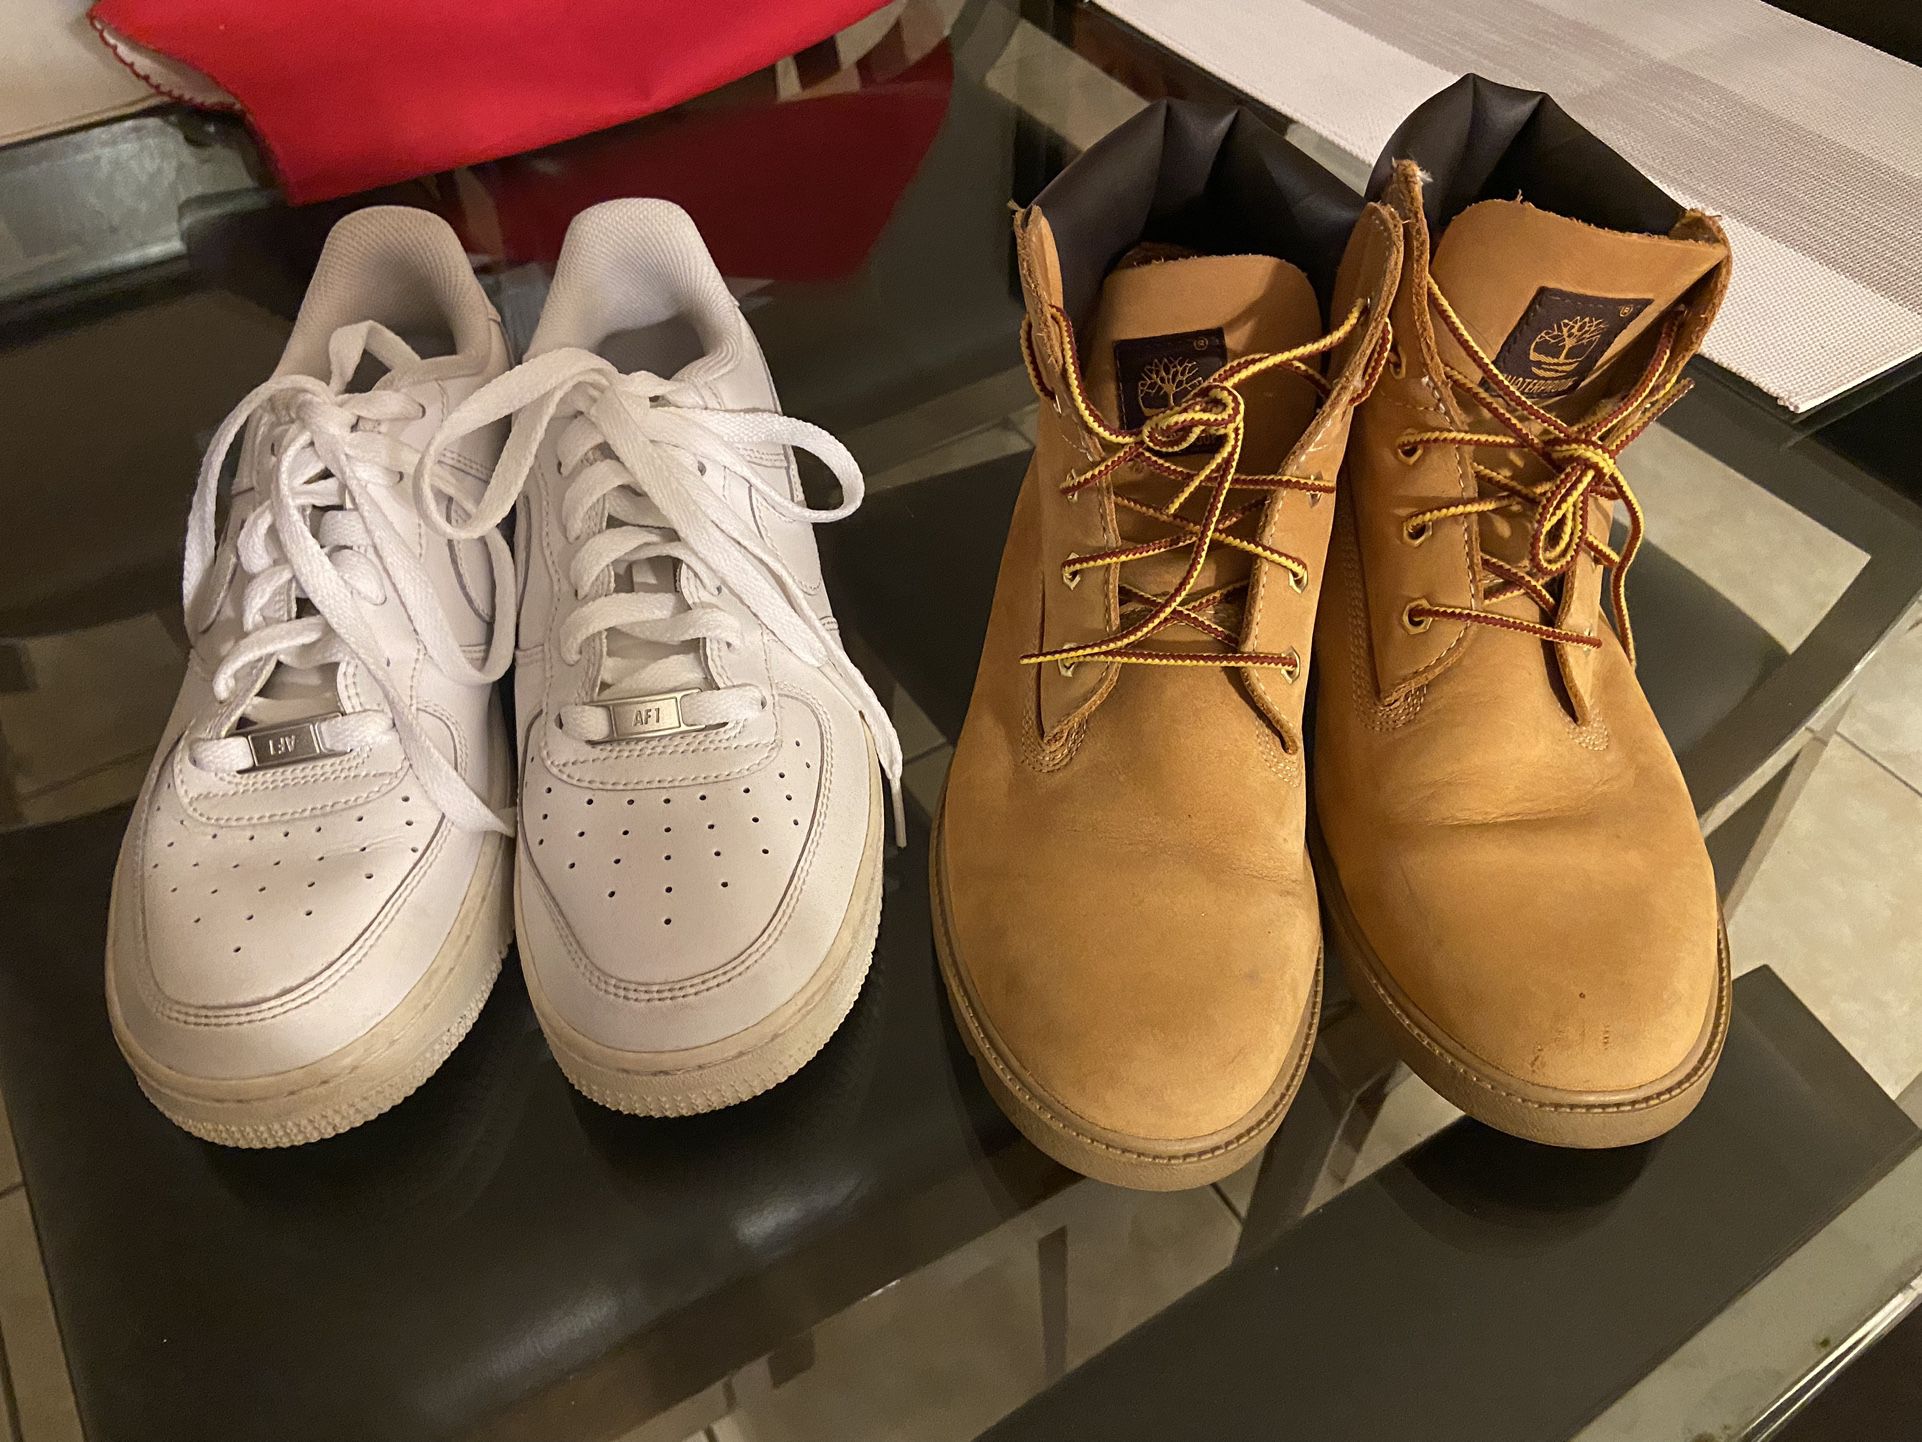 Nike Tennis Shoes $30.00 & Timberland Boots $50.00